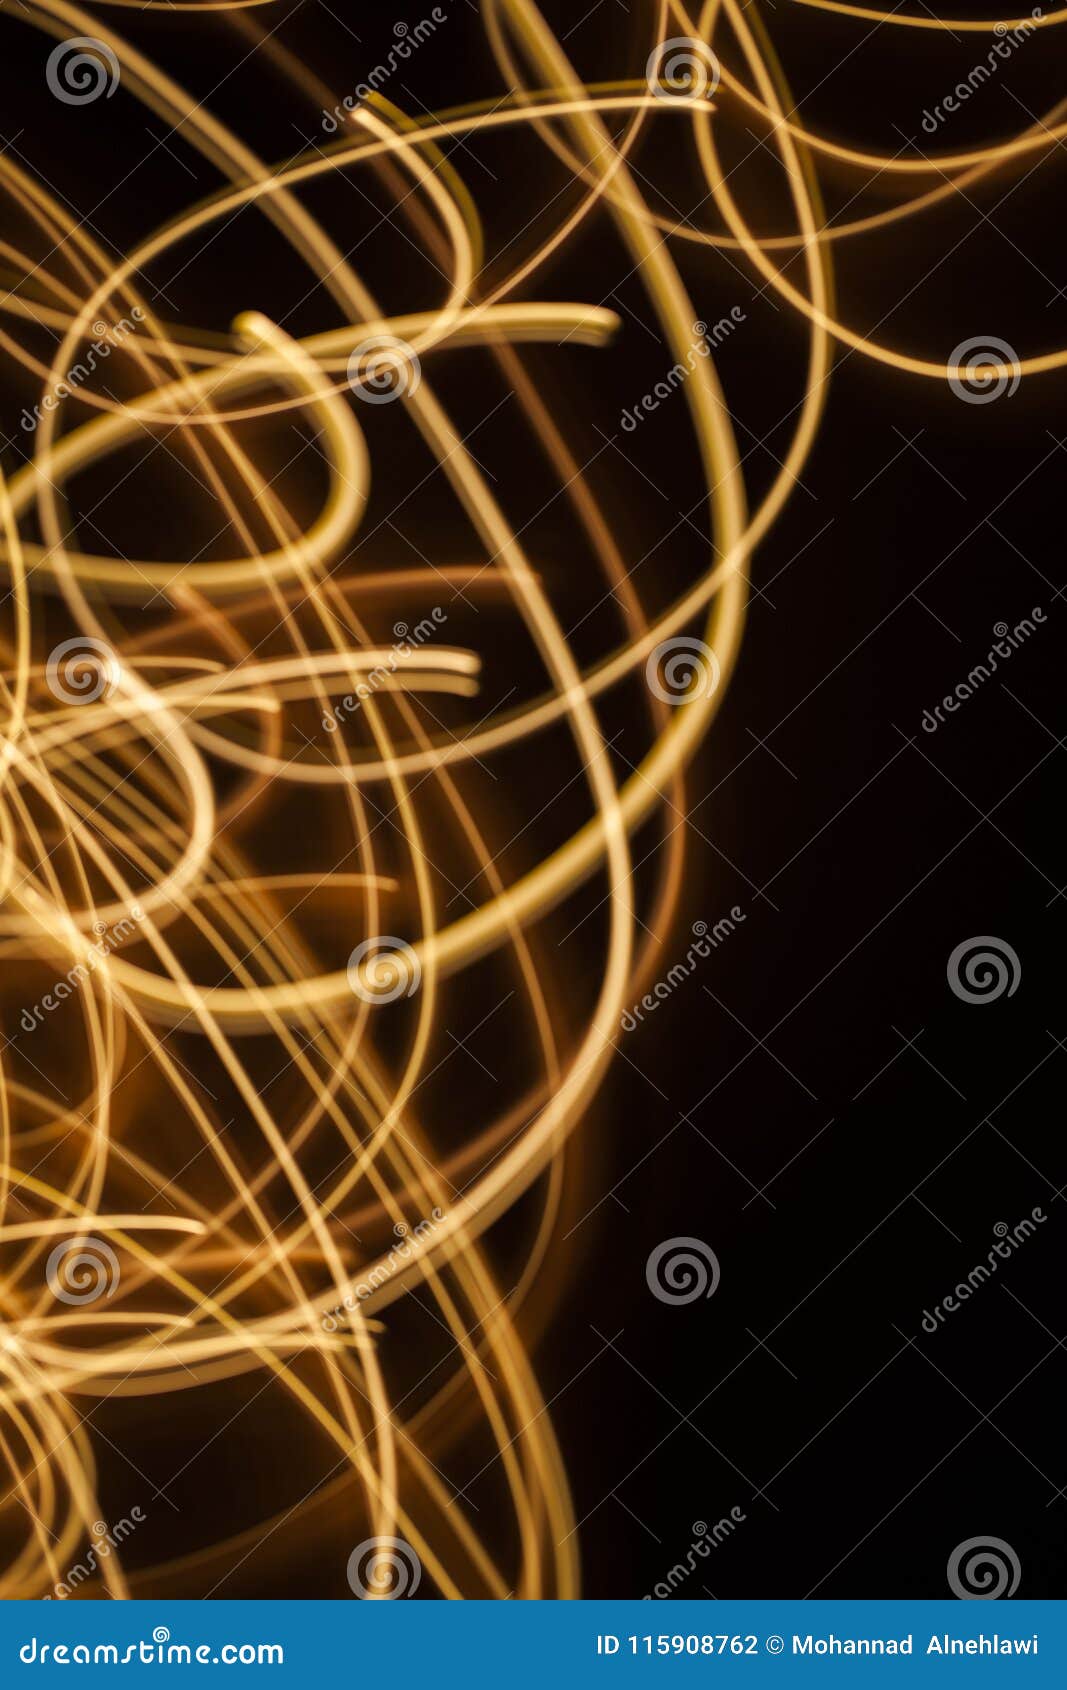 Swirl Sparkling Glowing Lines Background Stock Photo - Image of gold ...